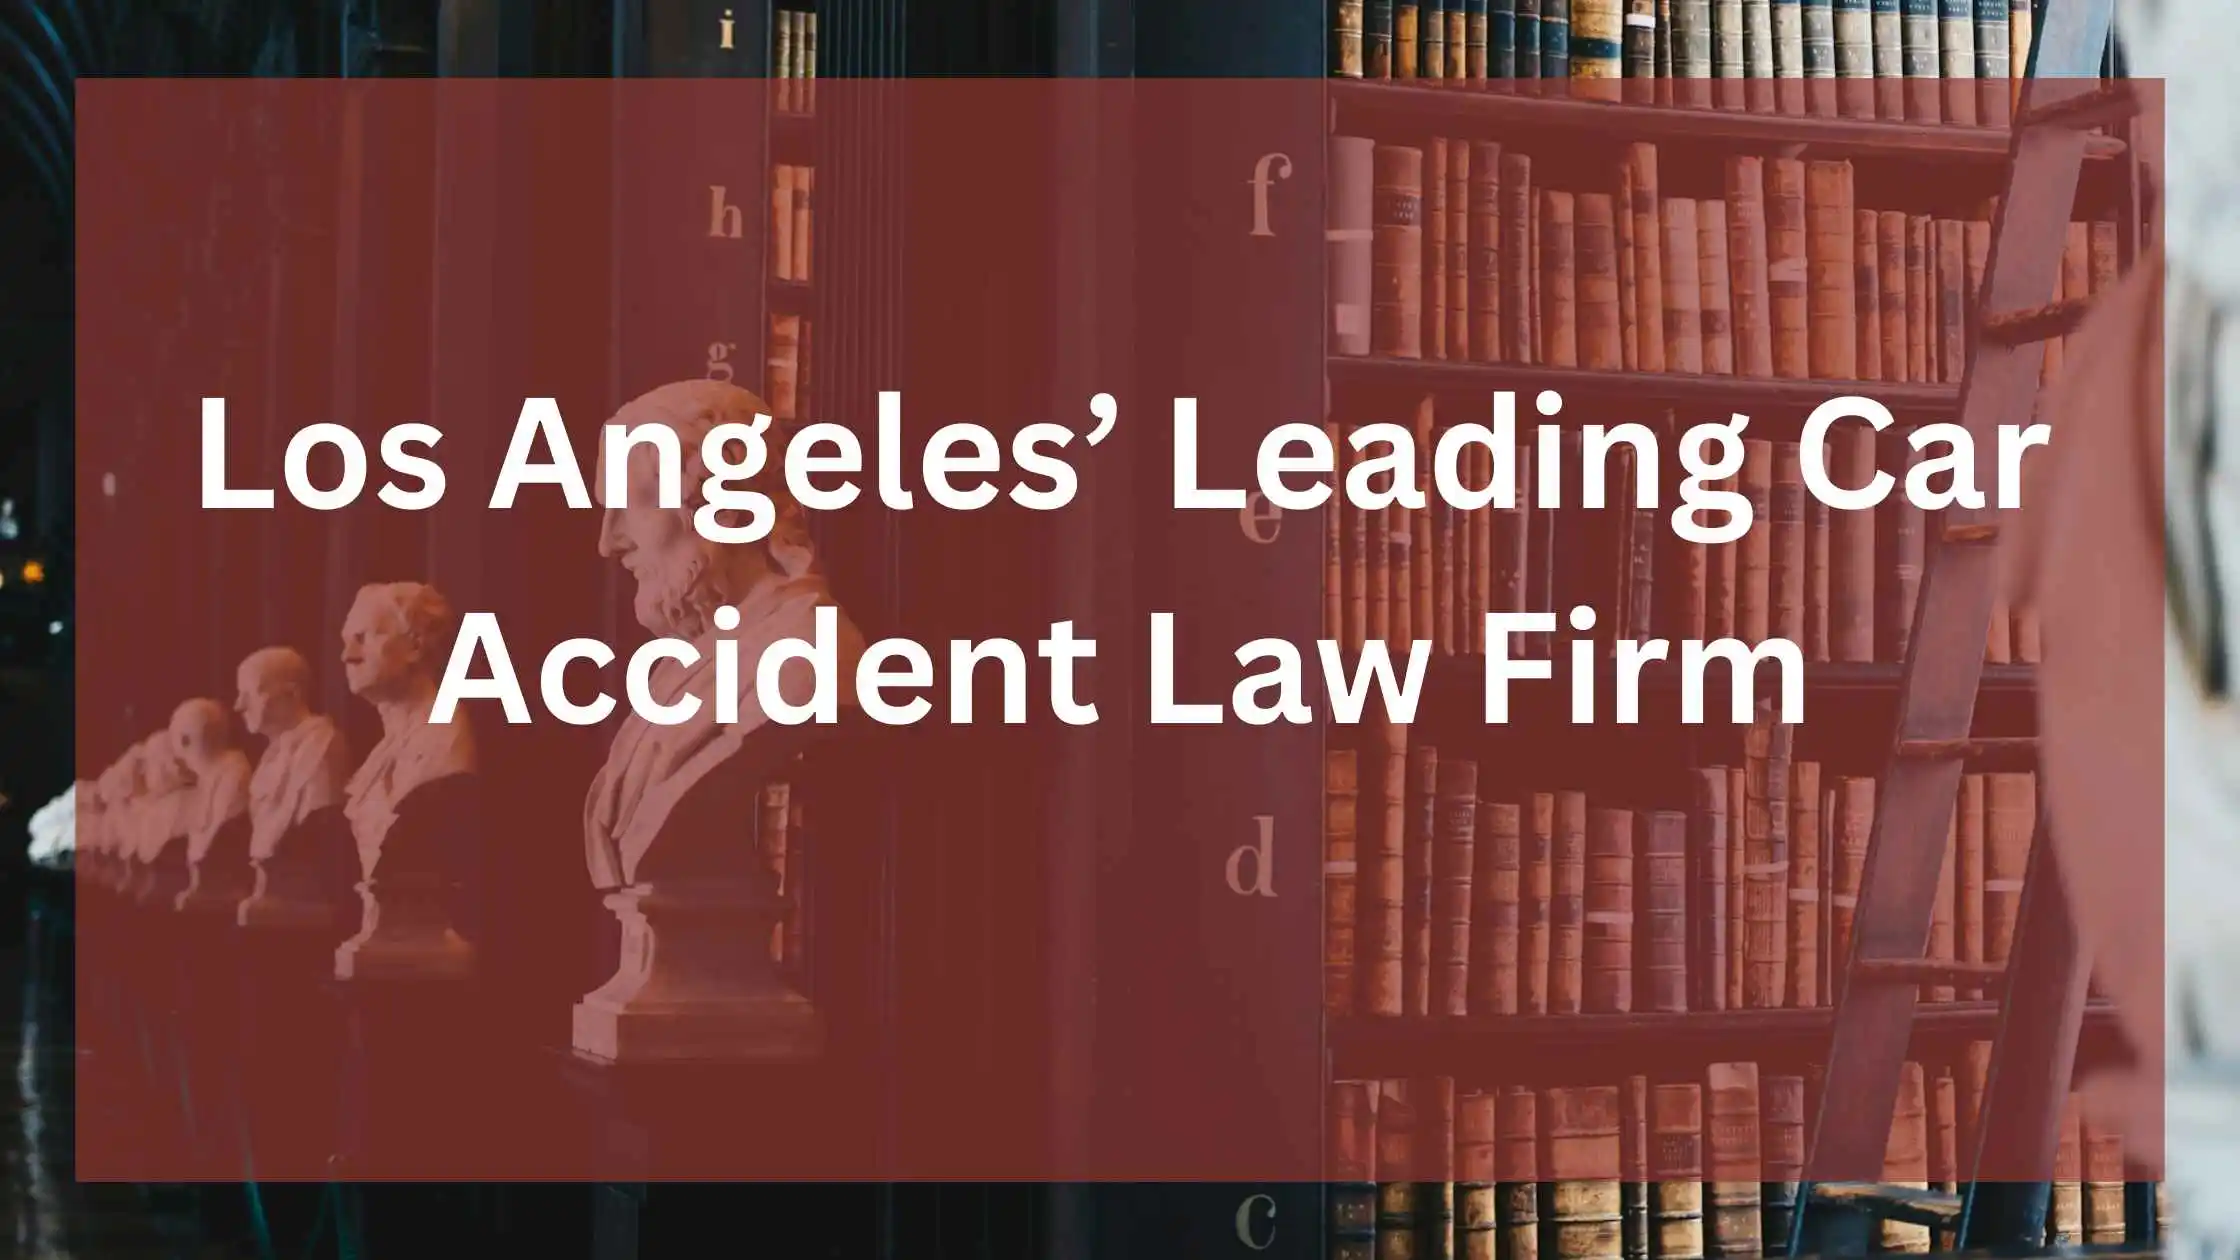 Los Angeles’ Leading Car Accident Law Firm